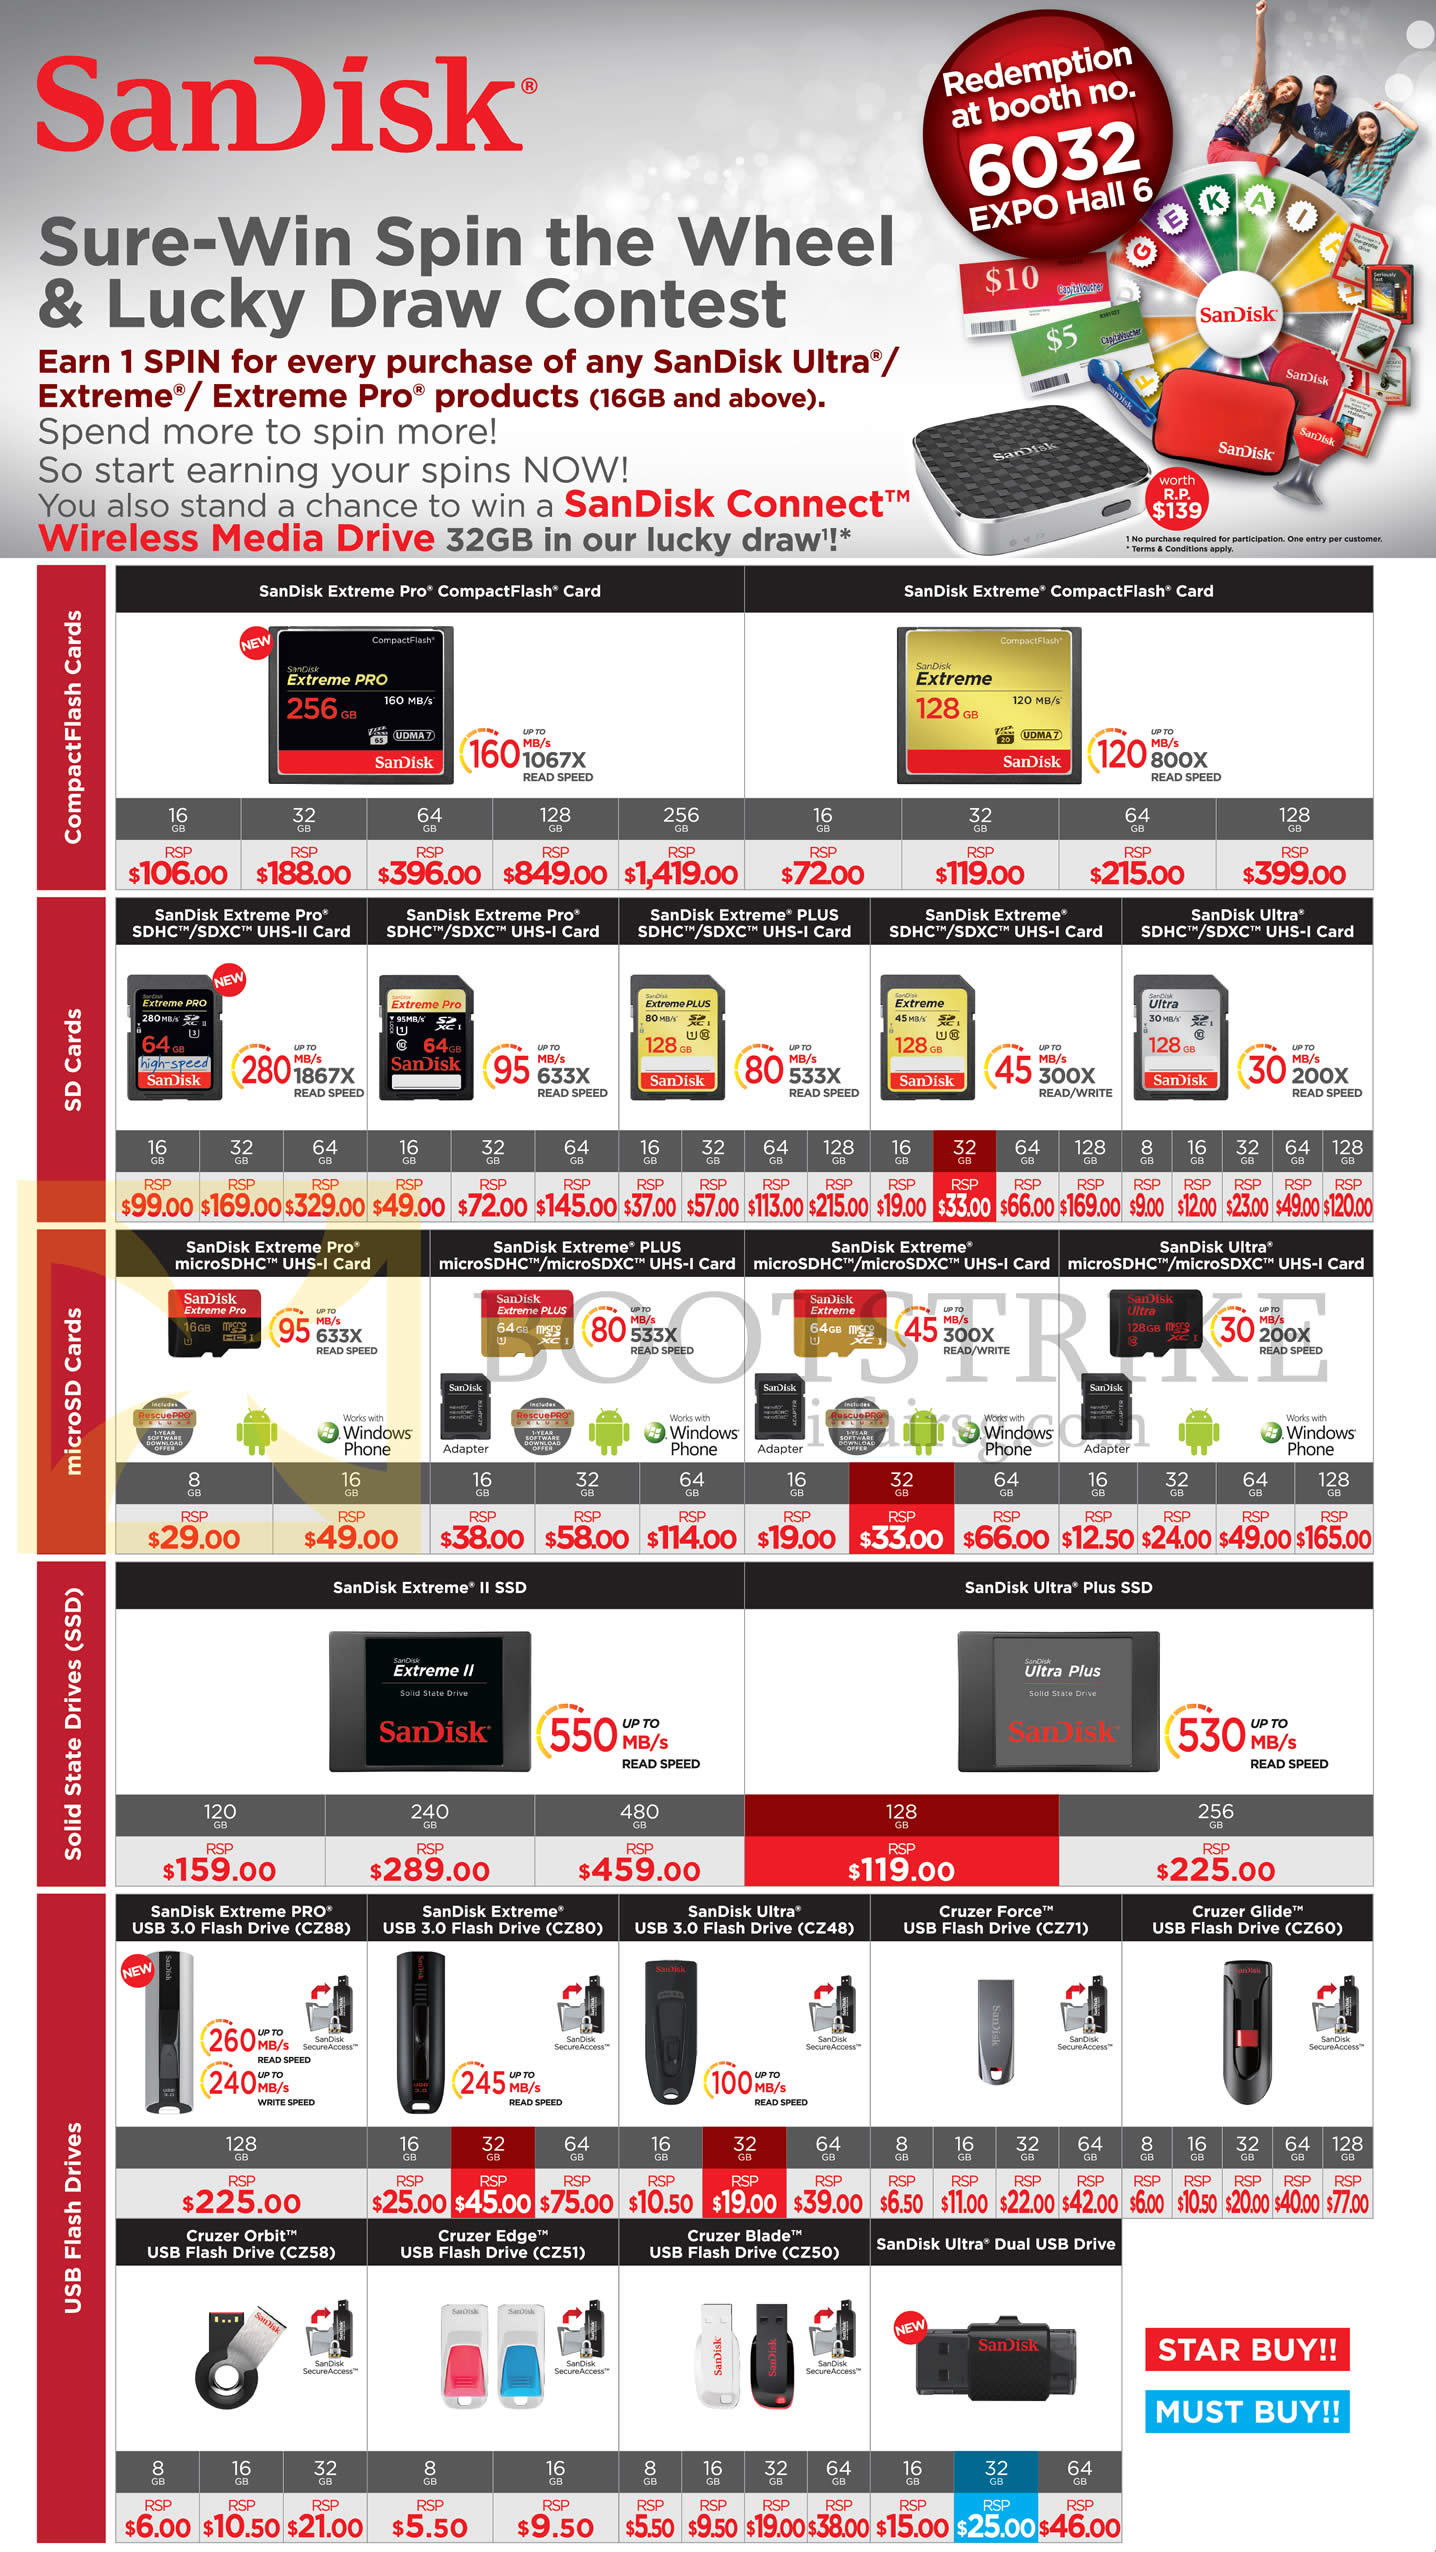 PC SHOW 2014 price list image brochure of Sandisk Flash Memory Cards Extreme Pro Compact Flash CF, Extreme Pro, Plus, Extreme, Ultra SDHC, UHS-1 Card, Extreme II, Ultra Plus SSD, Cruzer Force, Glide, Extreme Pro Drive